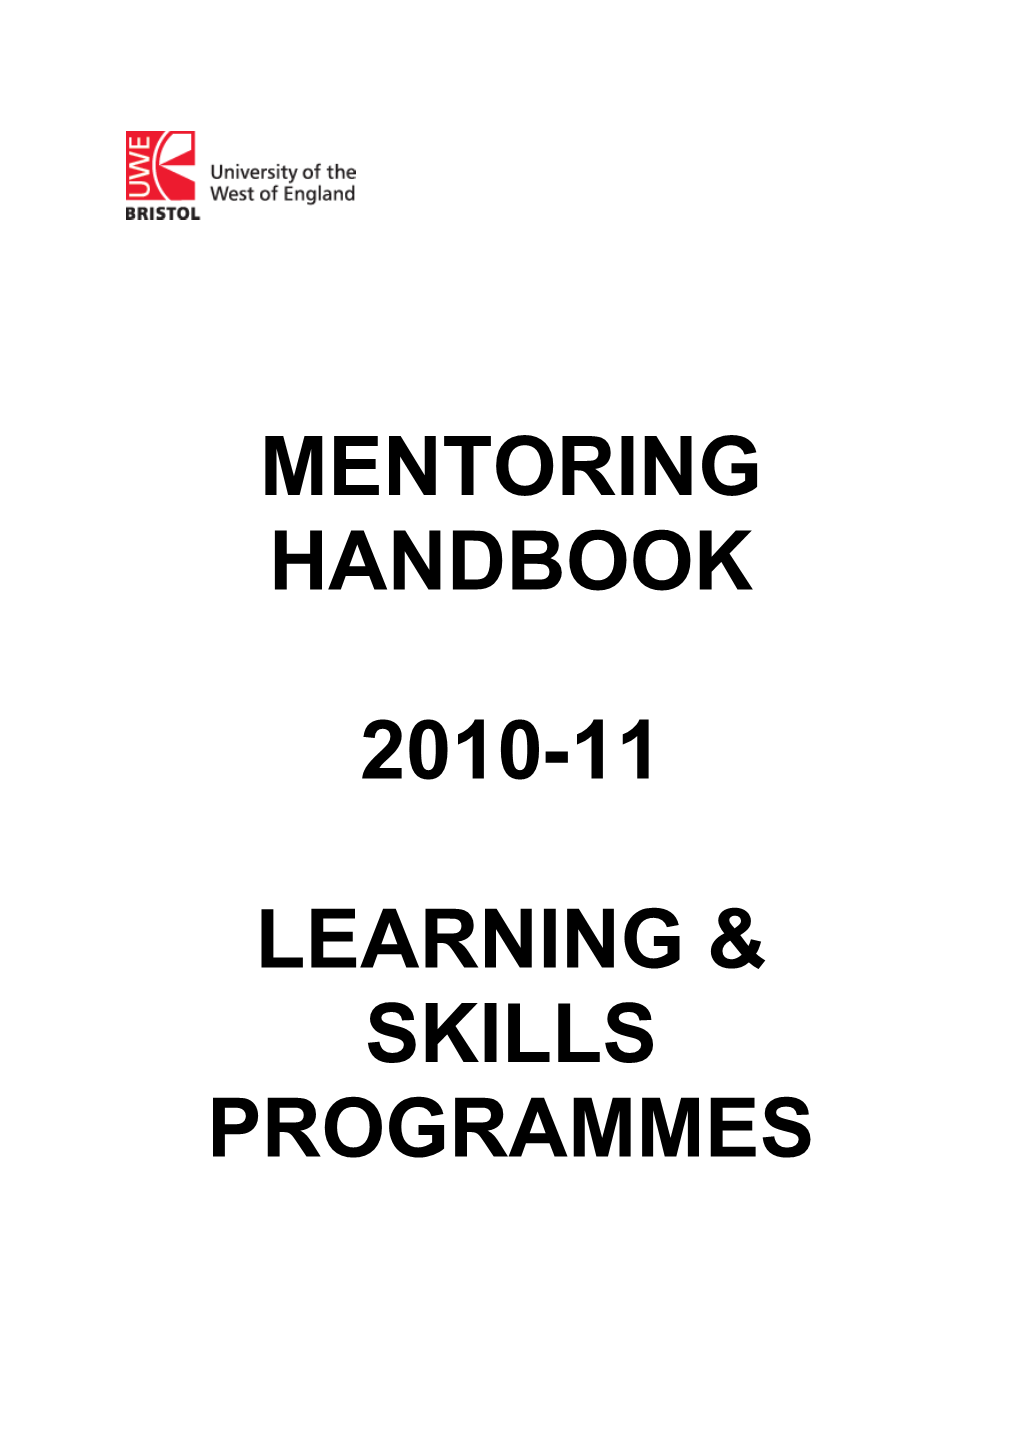 Quick Summary of Essential Information for Mentors and Mentees